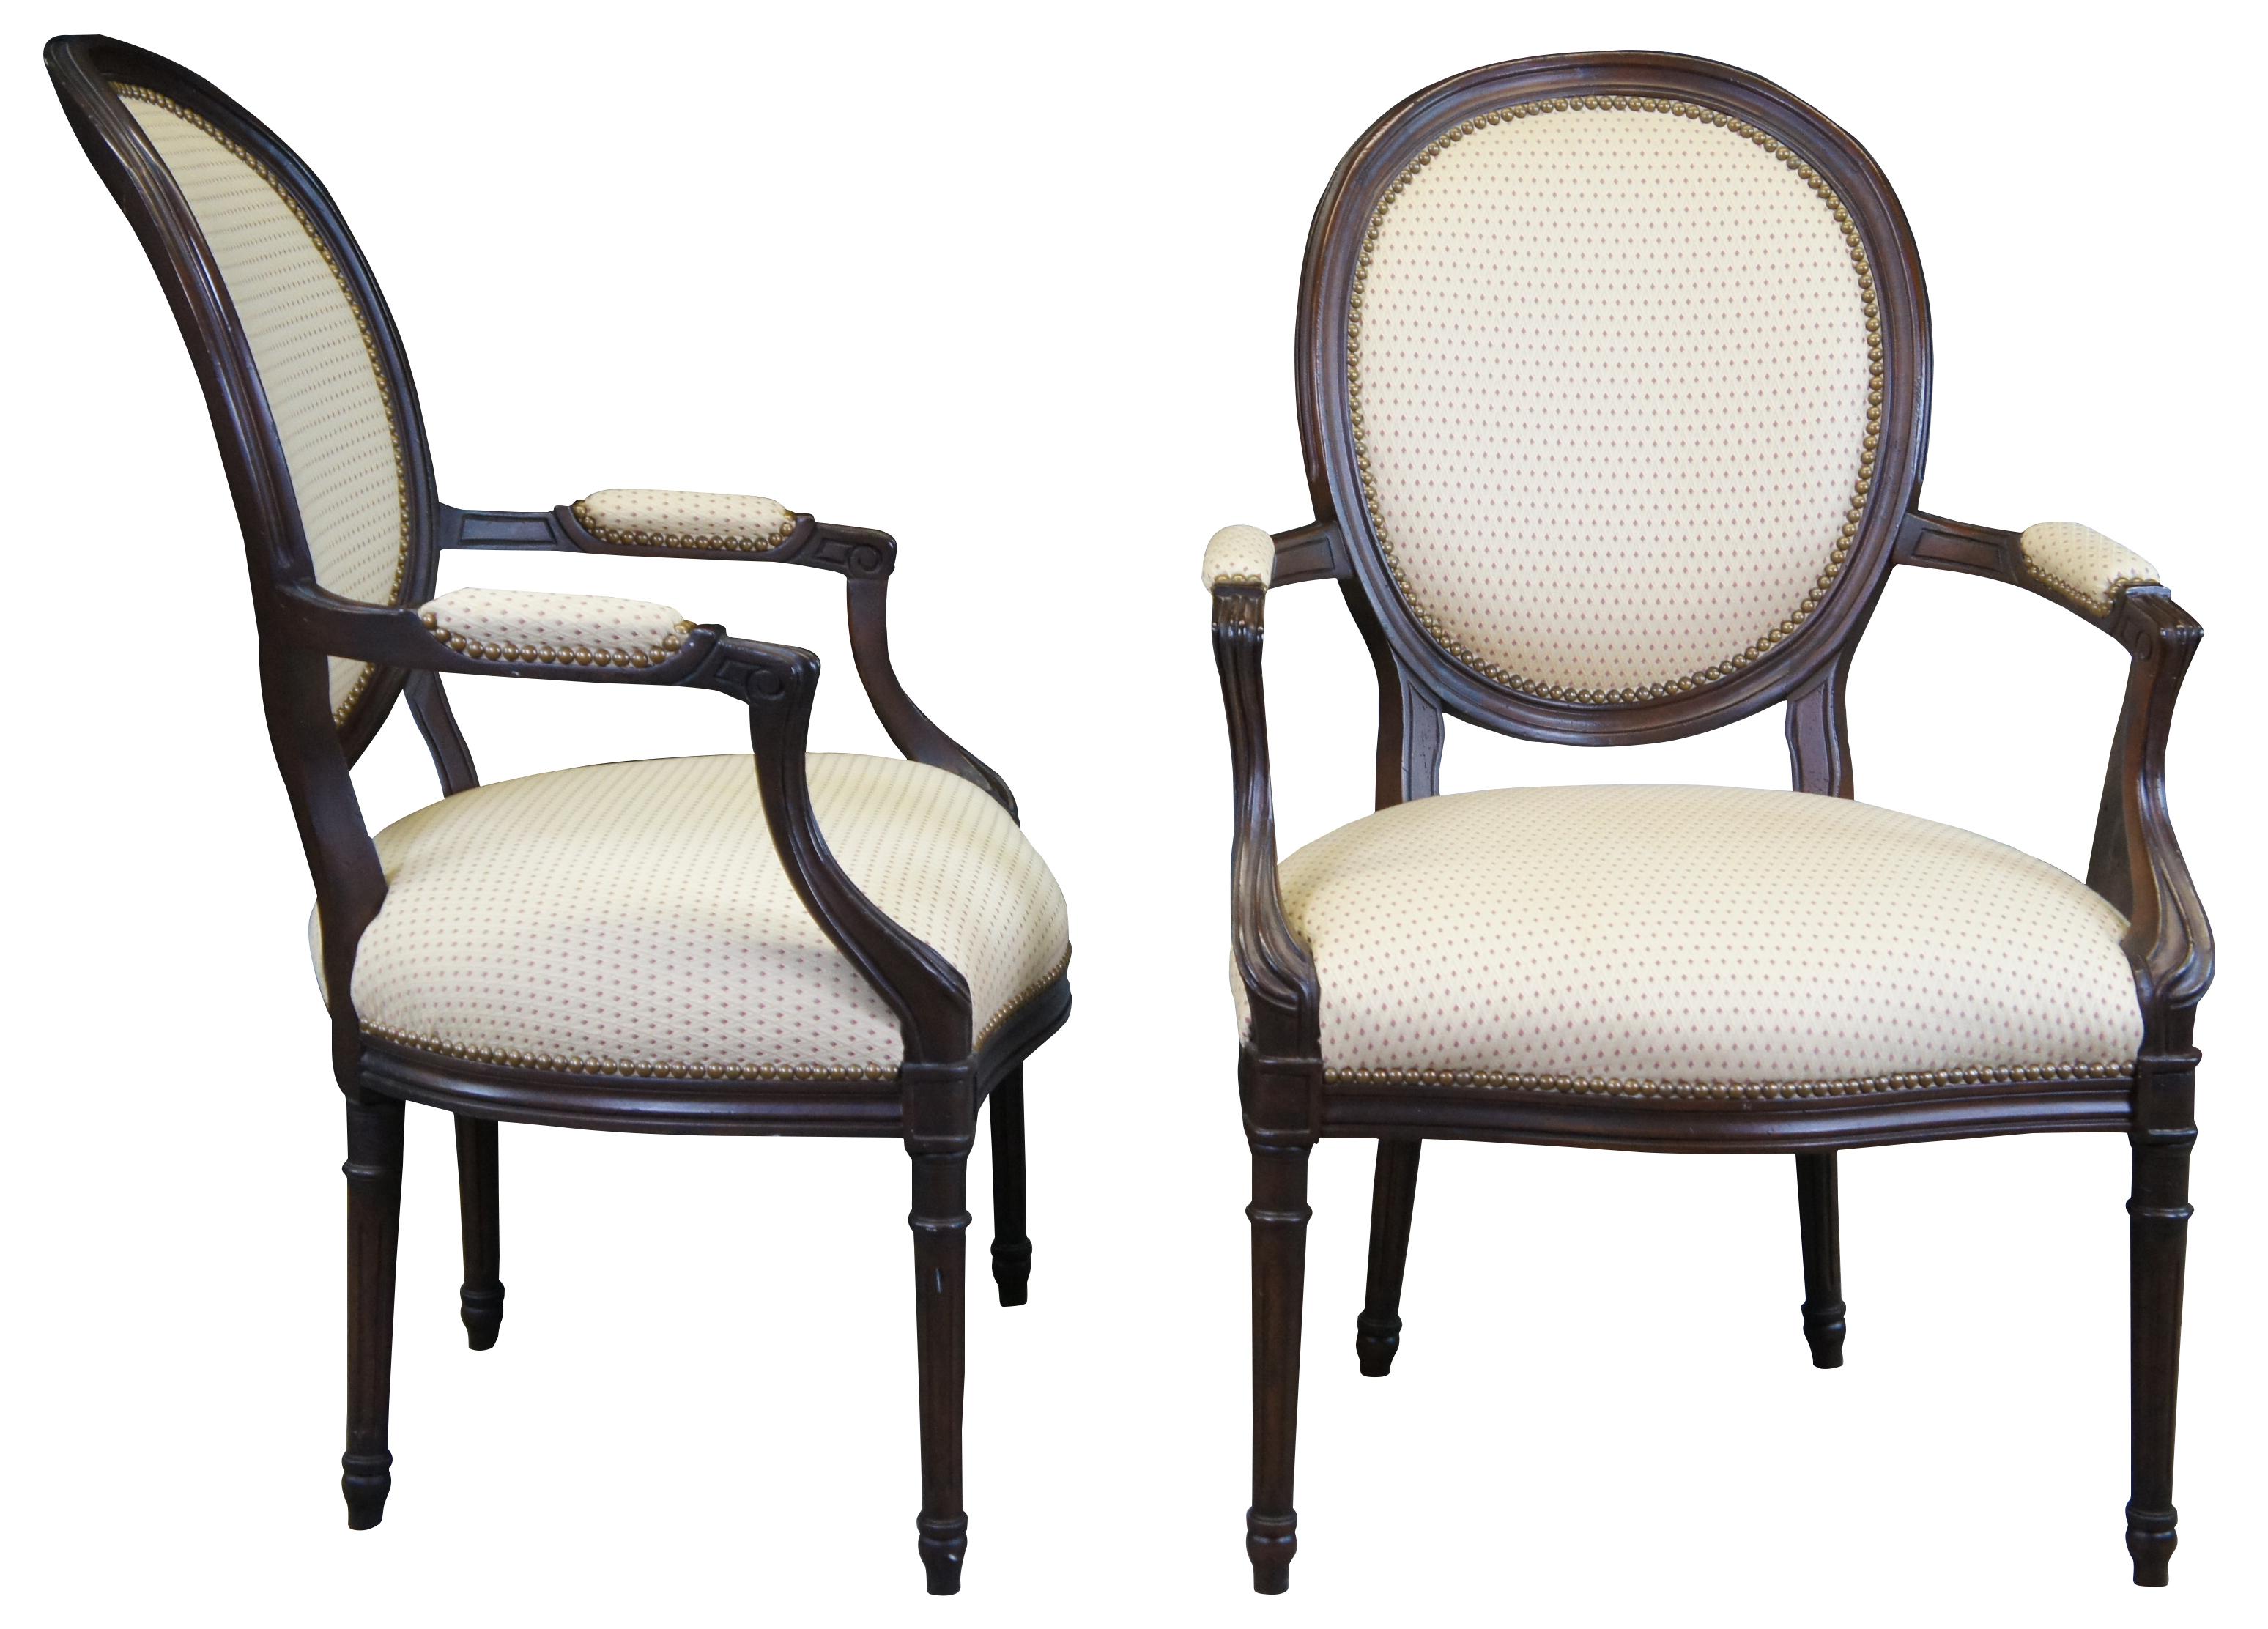 A lovely Neoclassical Revival George III style open arm chair. Features a balloon back, chanelled scrolled padded arms, serpentine seat rail and tapered fluted legs. Finished with brass nailhead trim. A noticeable difference between this chair and